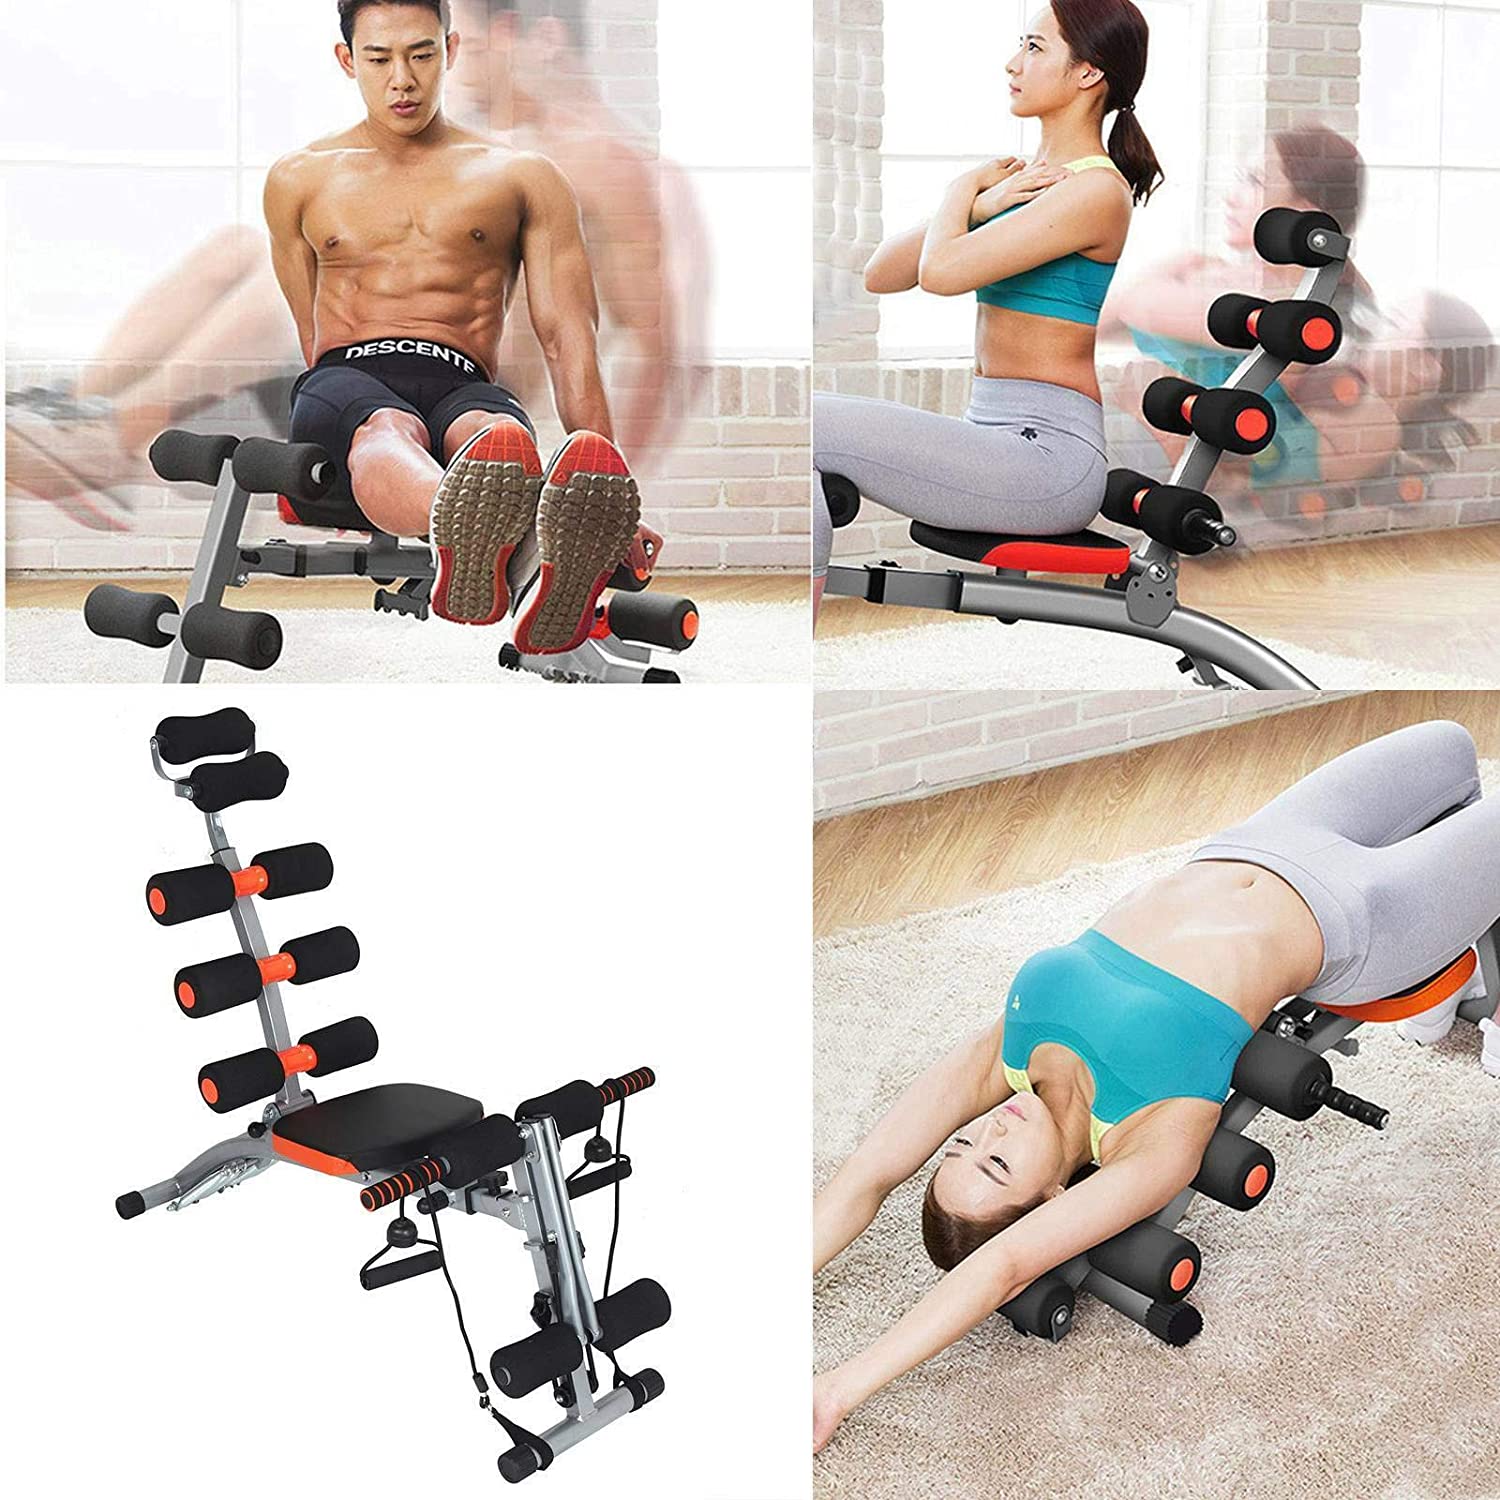 Six Pack Care Work-out Machine dascription